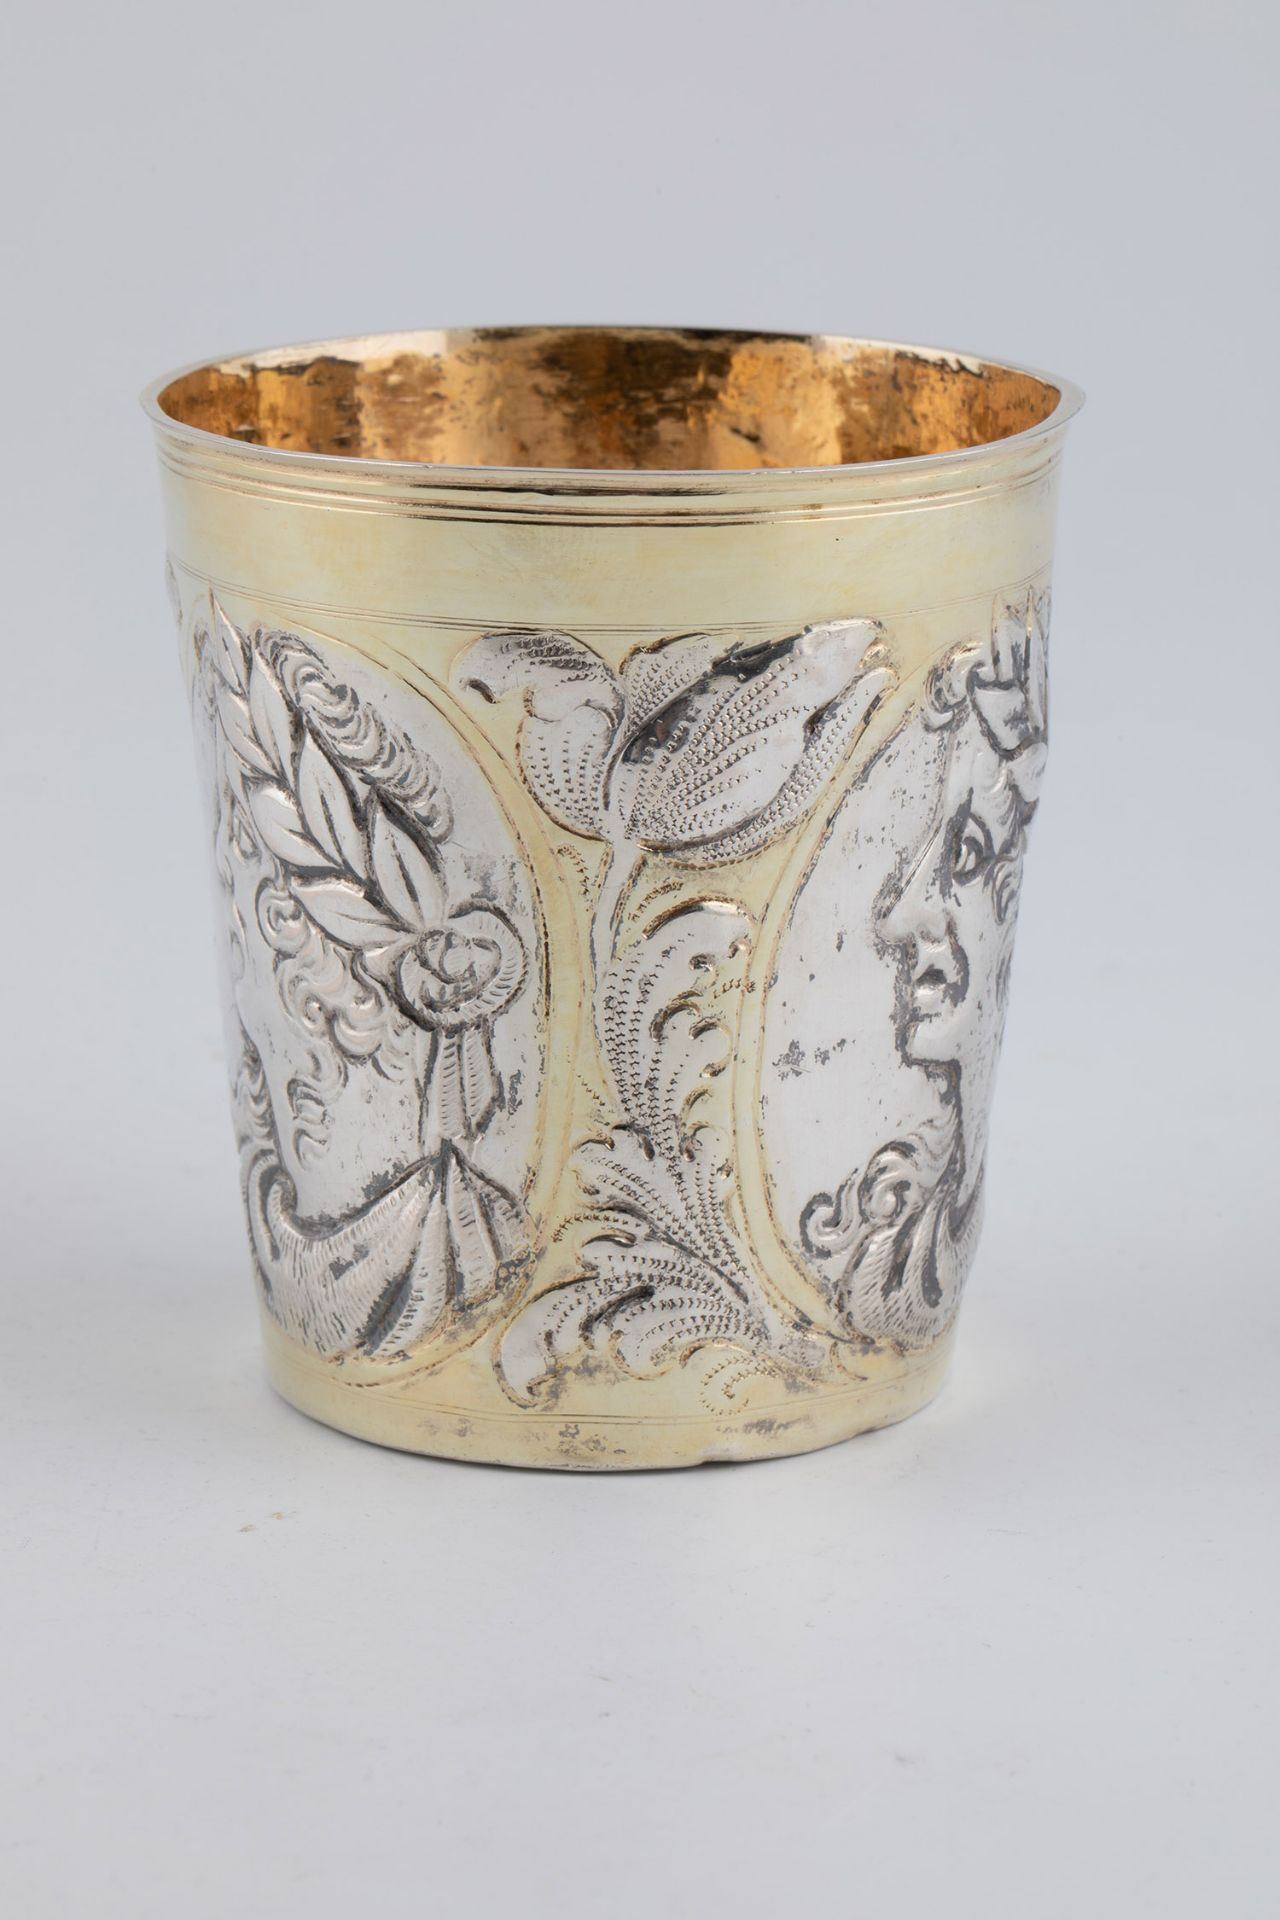 Small baroque cup - Image 2 of 4